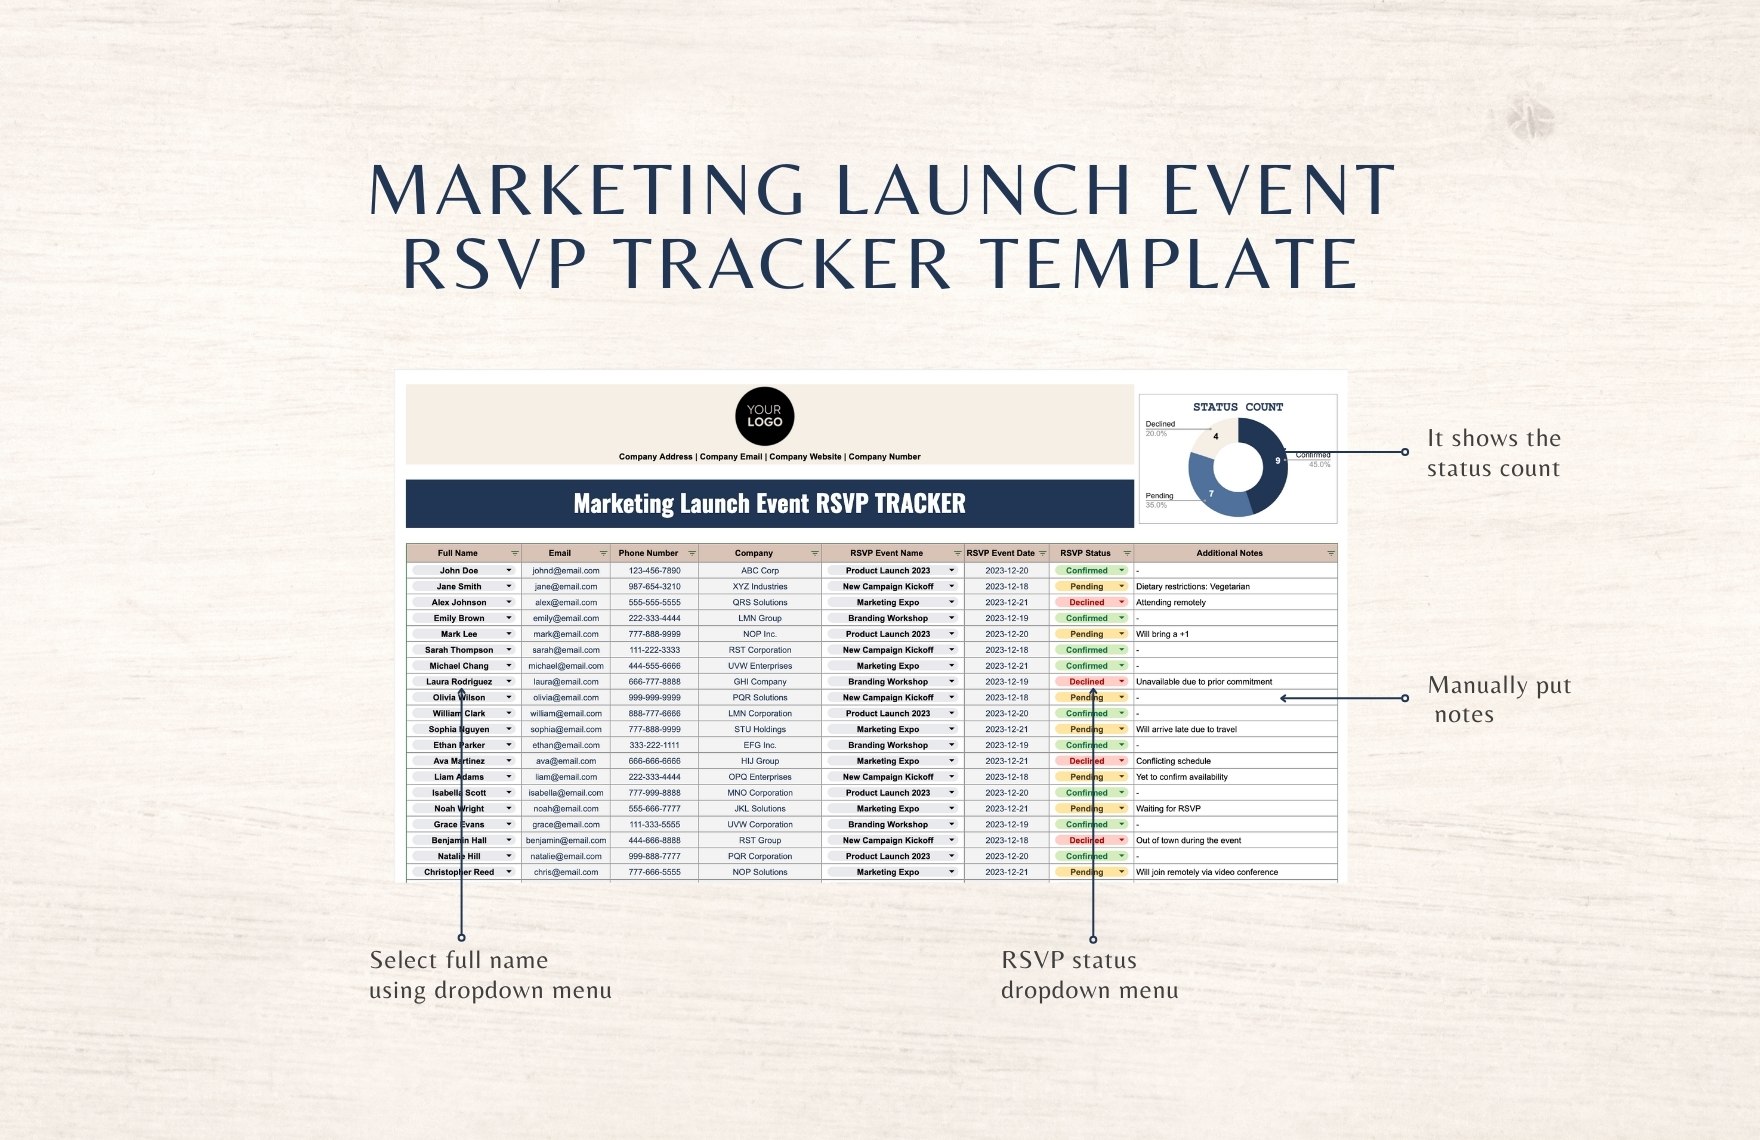 Marketing Launch Event RSVP Tracker Template